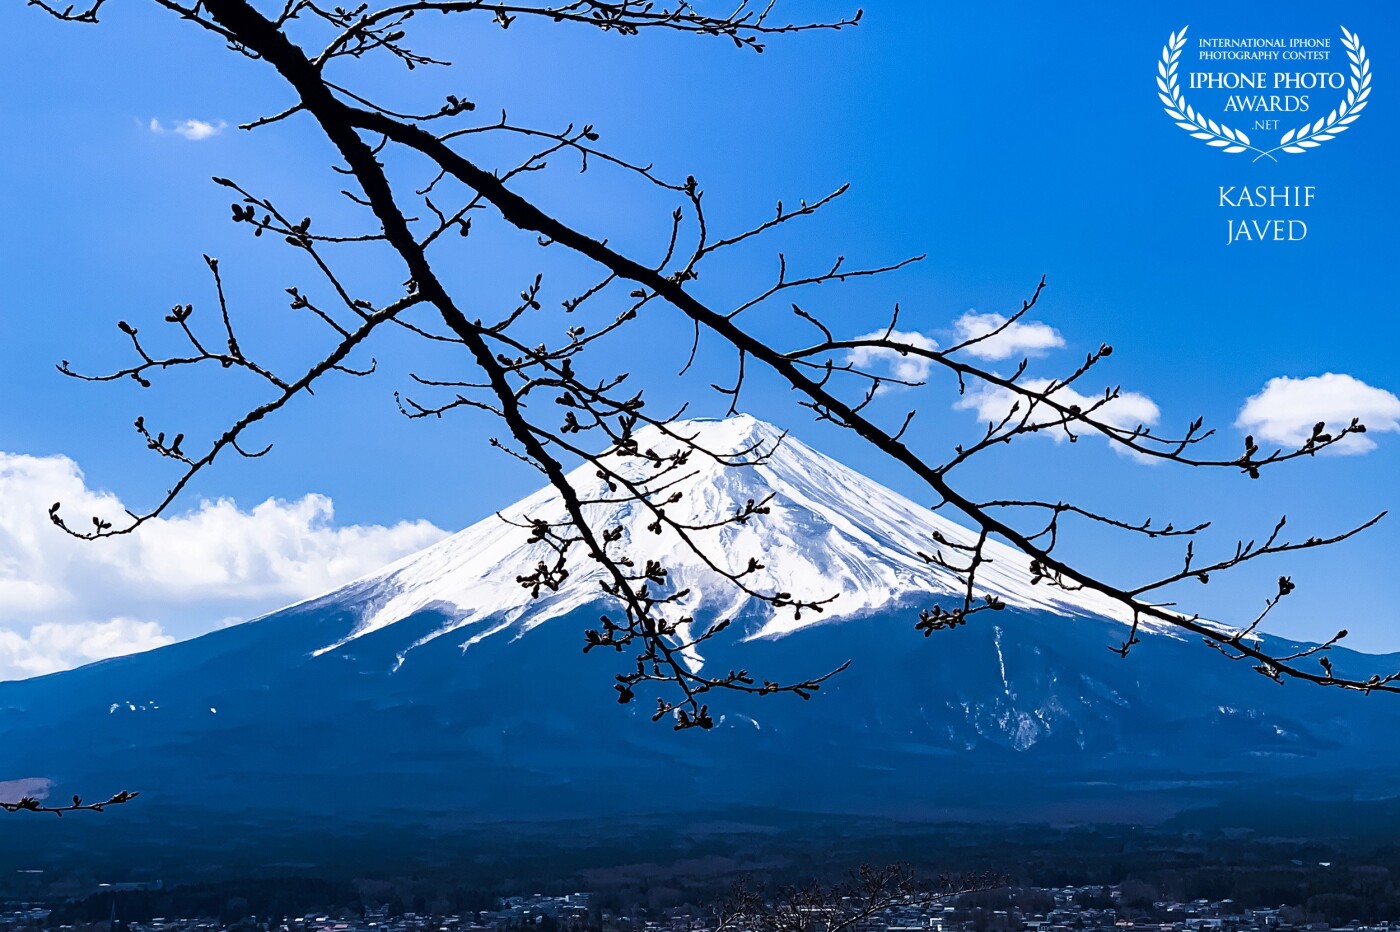 I took this photo during my recent trip to Japan, it was a coldish spring day with beautiful blue skies. One can never get tired of Mount Fuji’s views, no words or photographs can completely describe the majesty of Mount Fuji<br />
<br />
‘On earth, there is no heaven, but there are pieced of it’ – Jules Renard